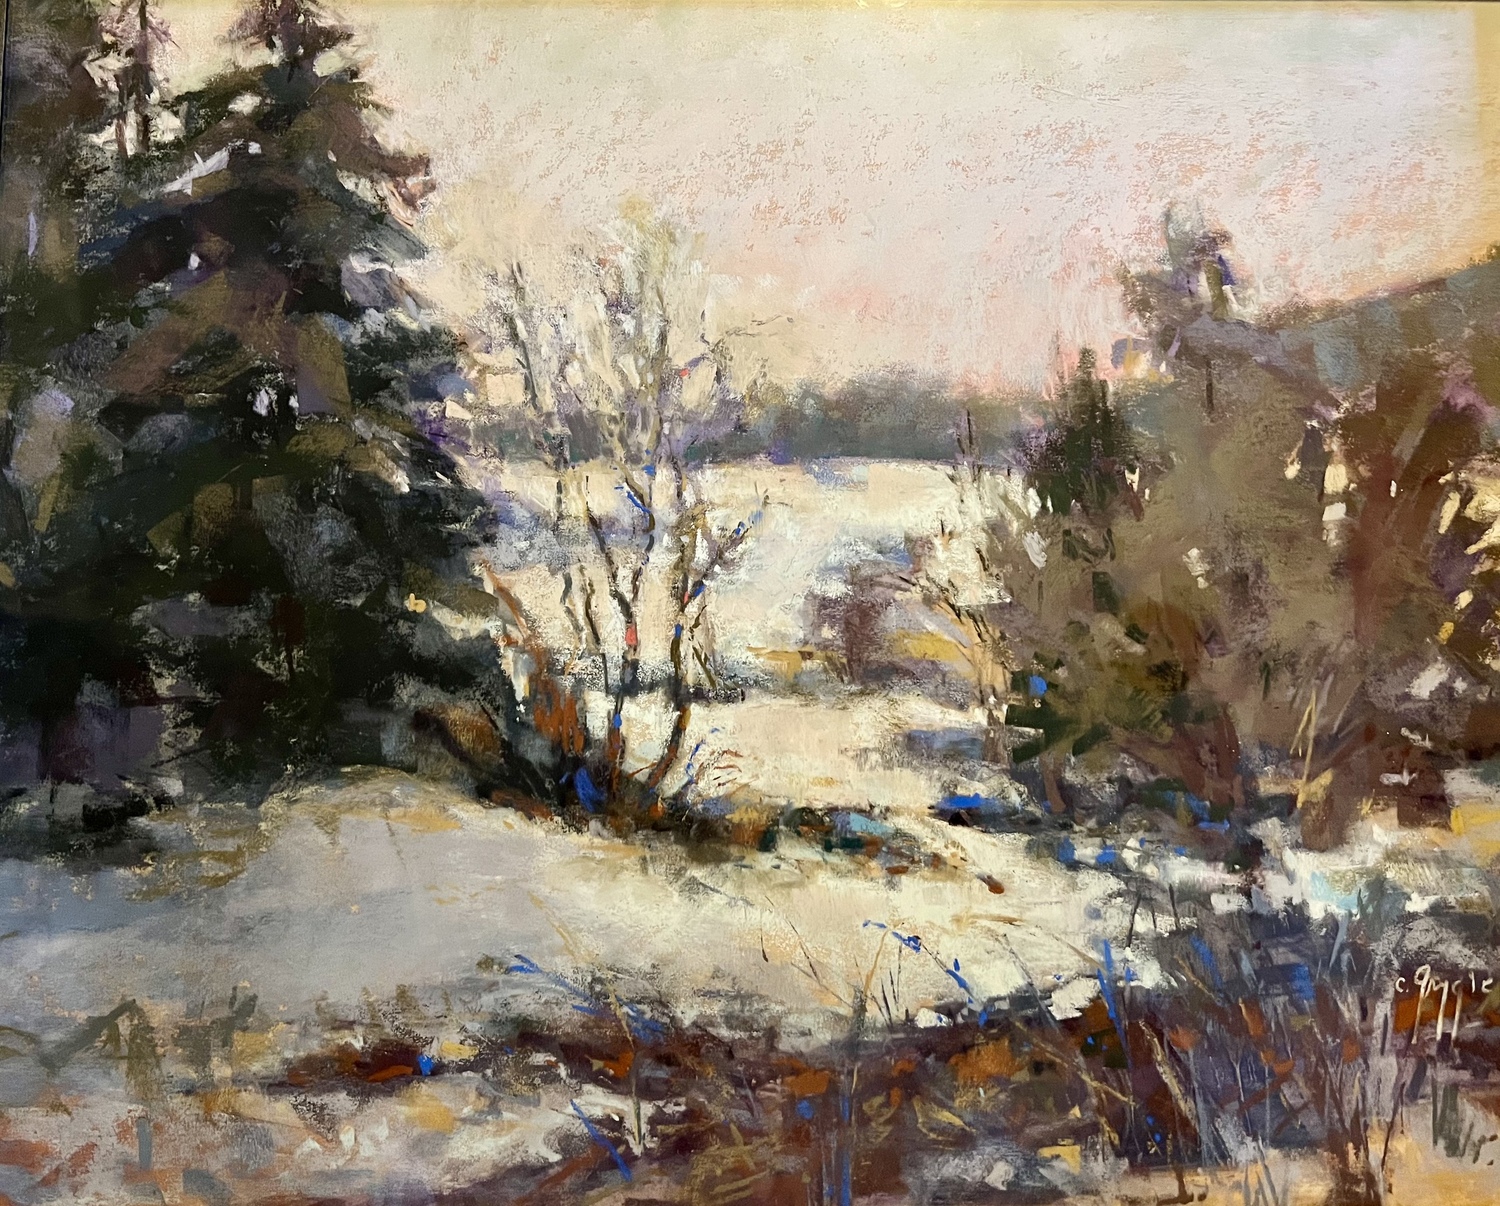 Catherine Grygiel, "Winter Solitude," pastel, winner of the Arete Award of excellence.